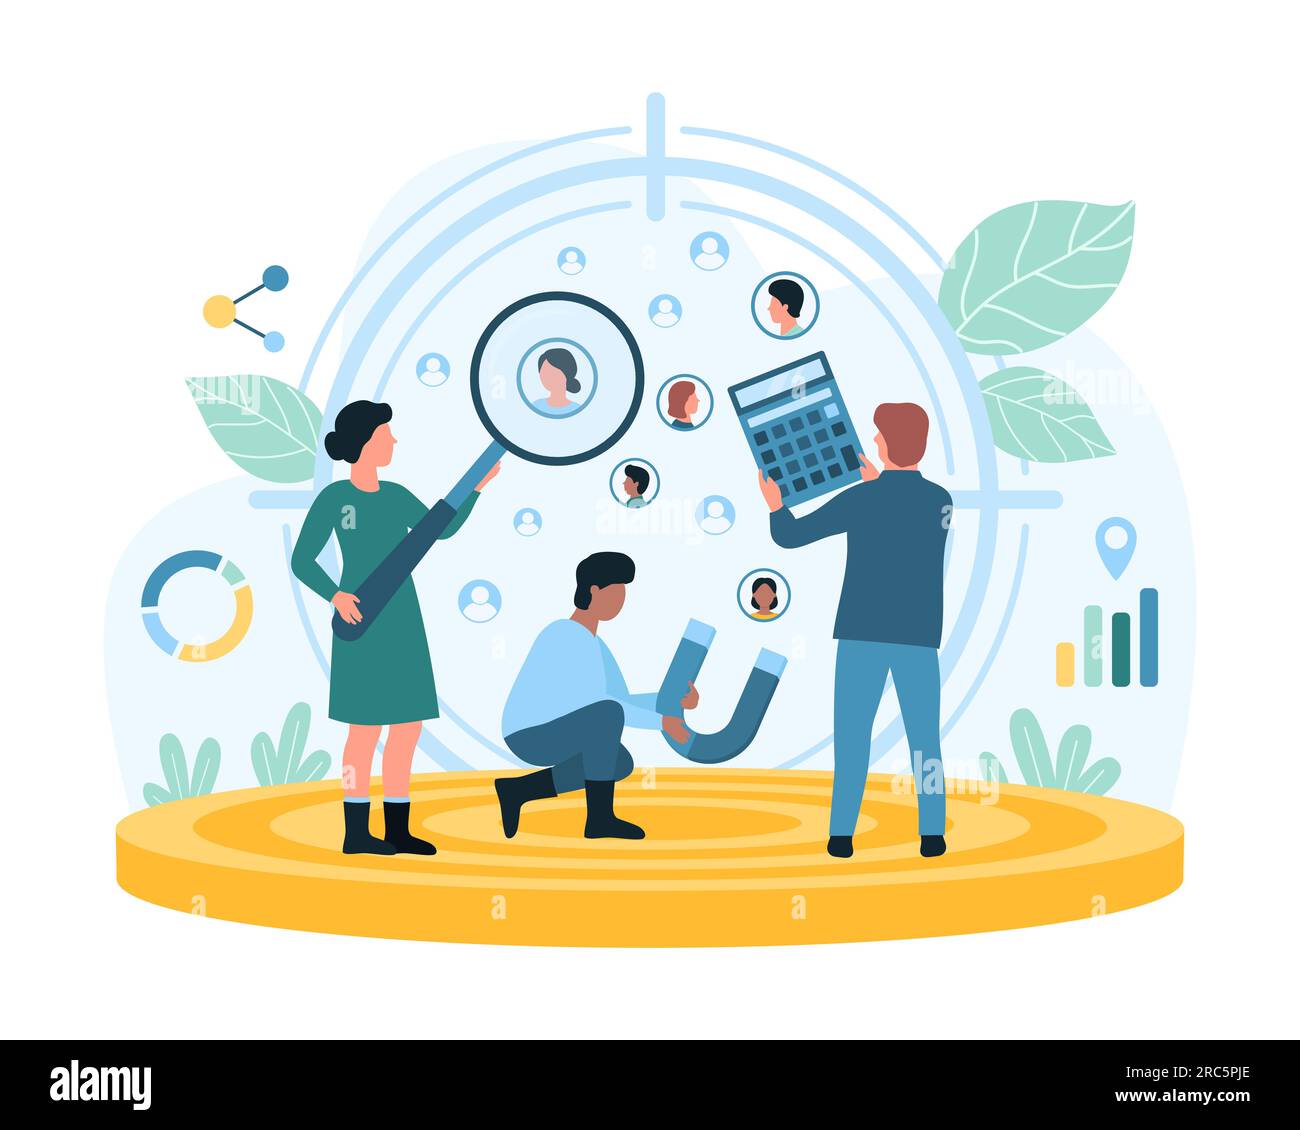 Focus group research service vector illustration. Cartoon tiny people ...